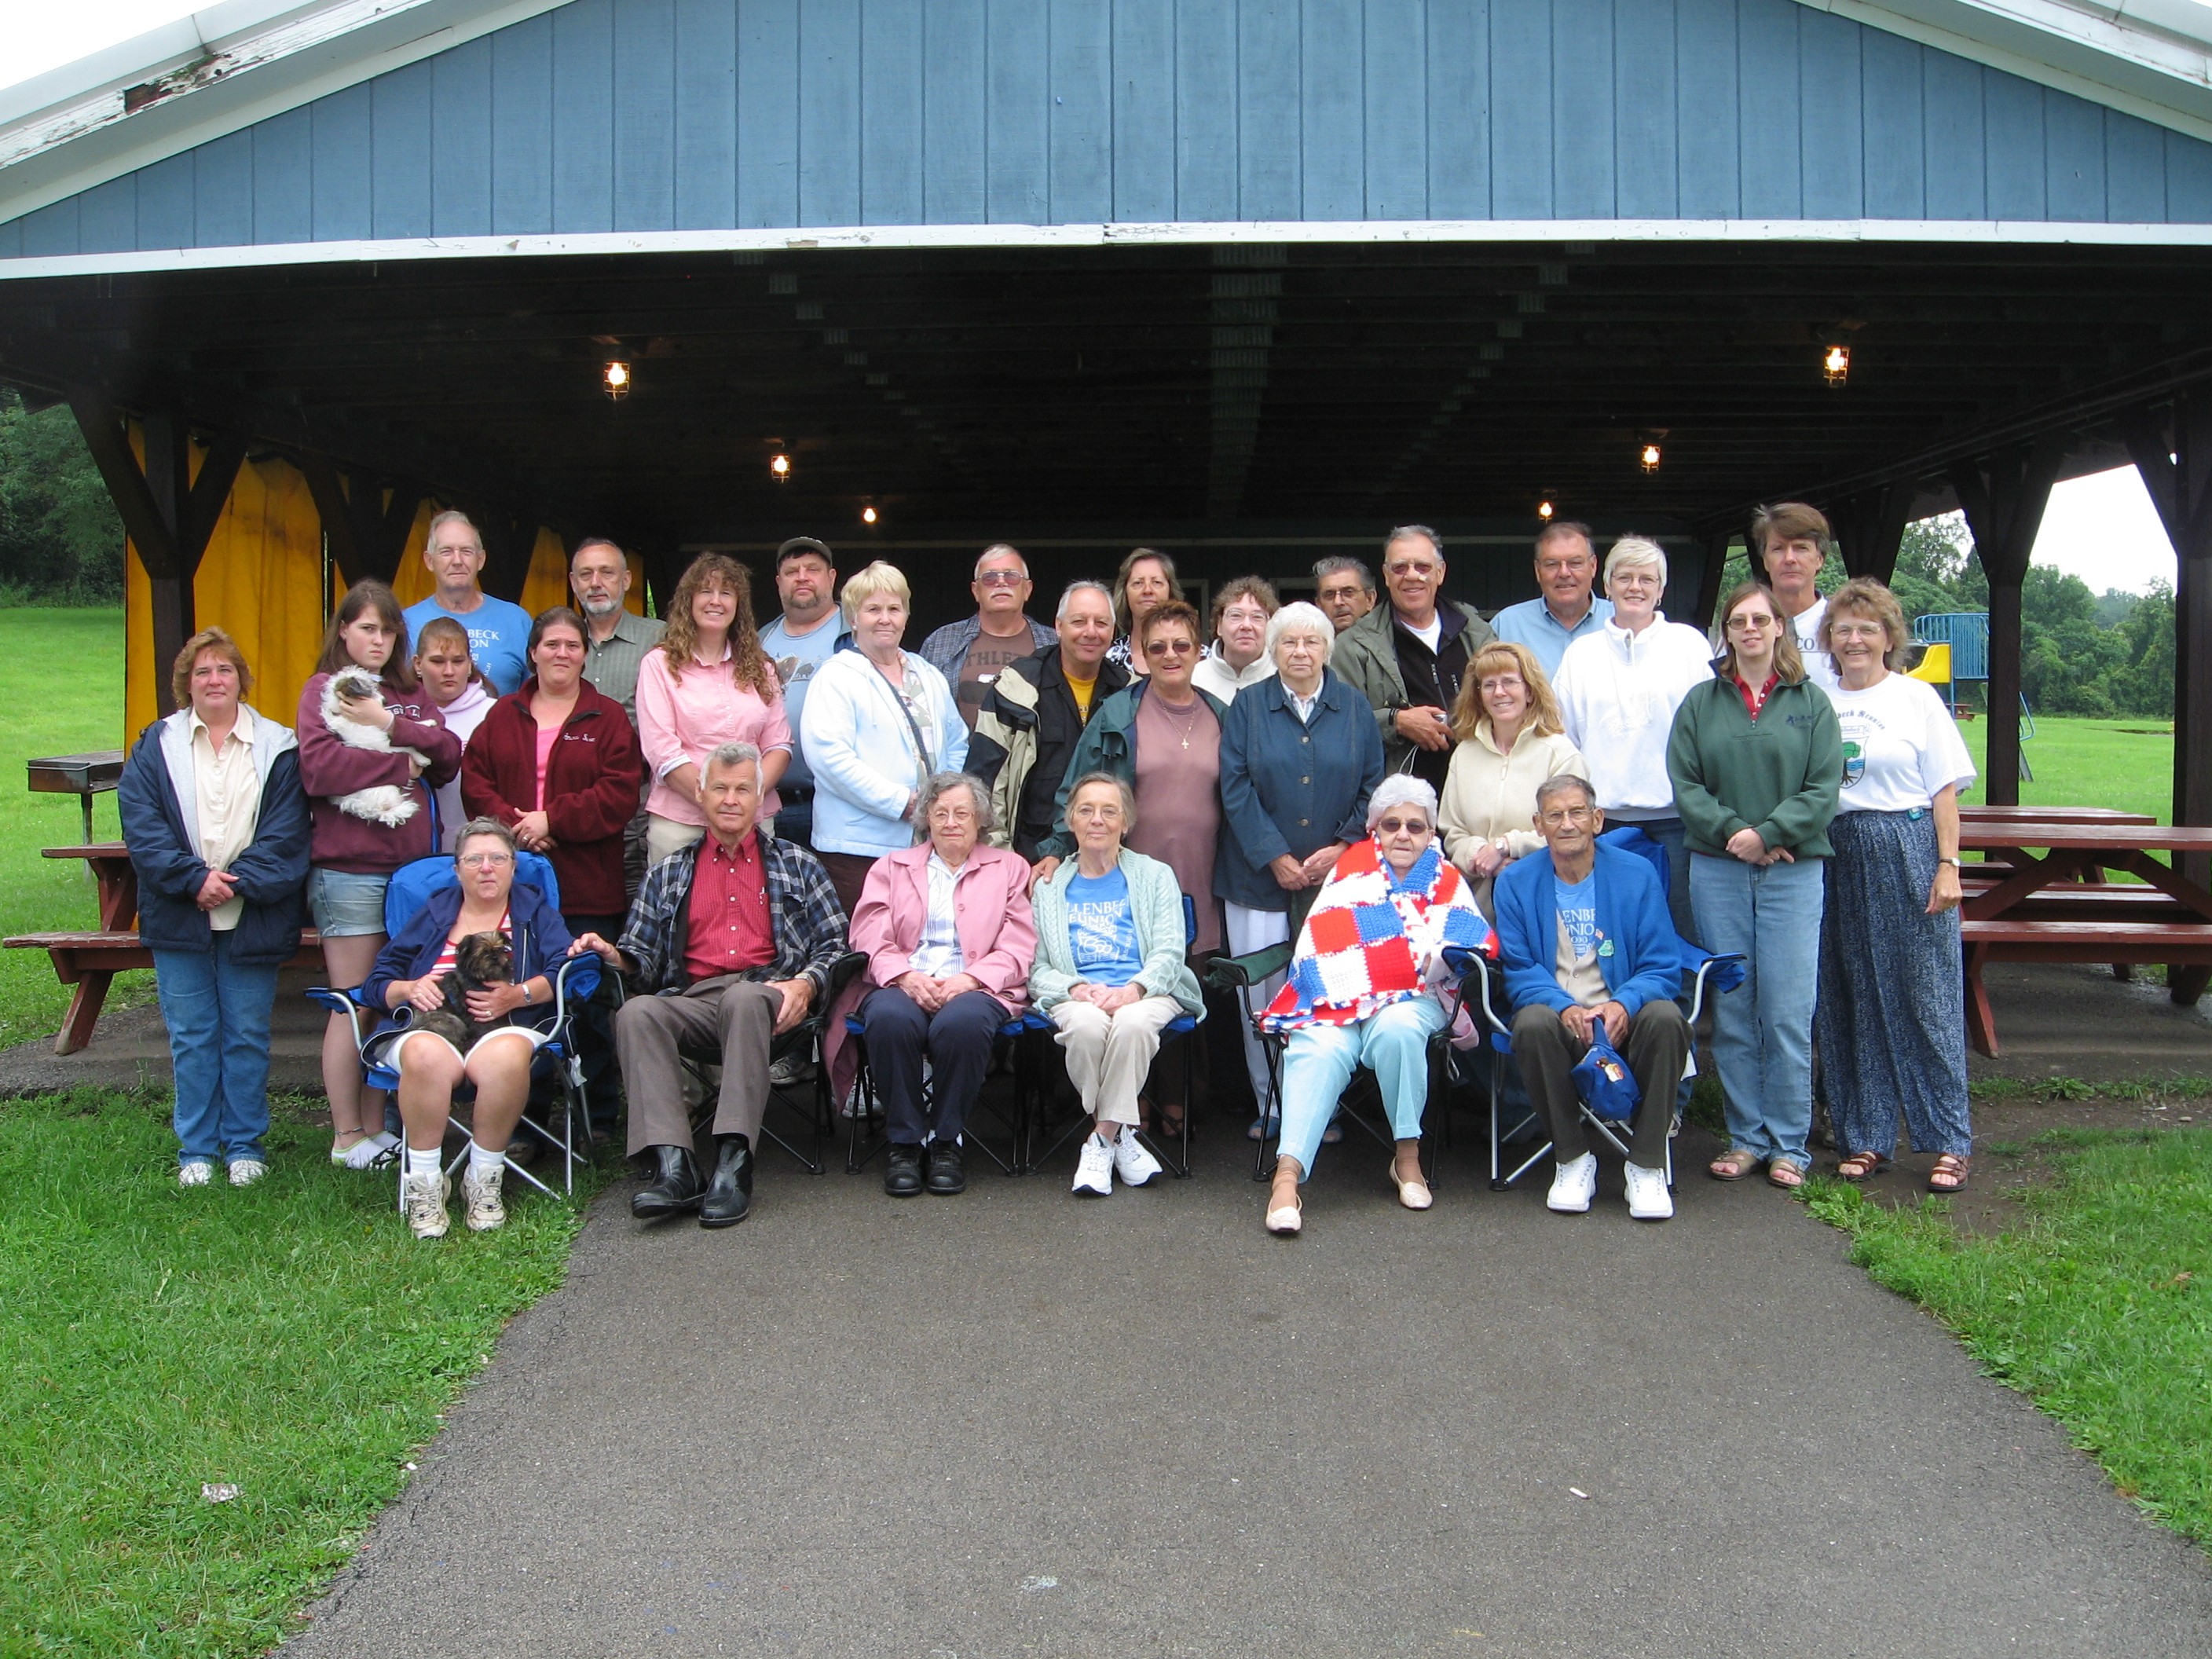 The 108th Dillenbeck Family Reunion